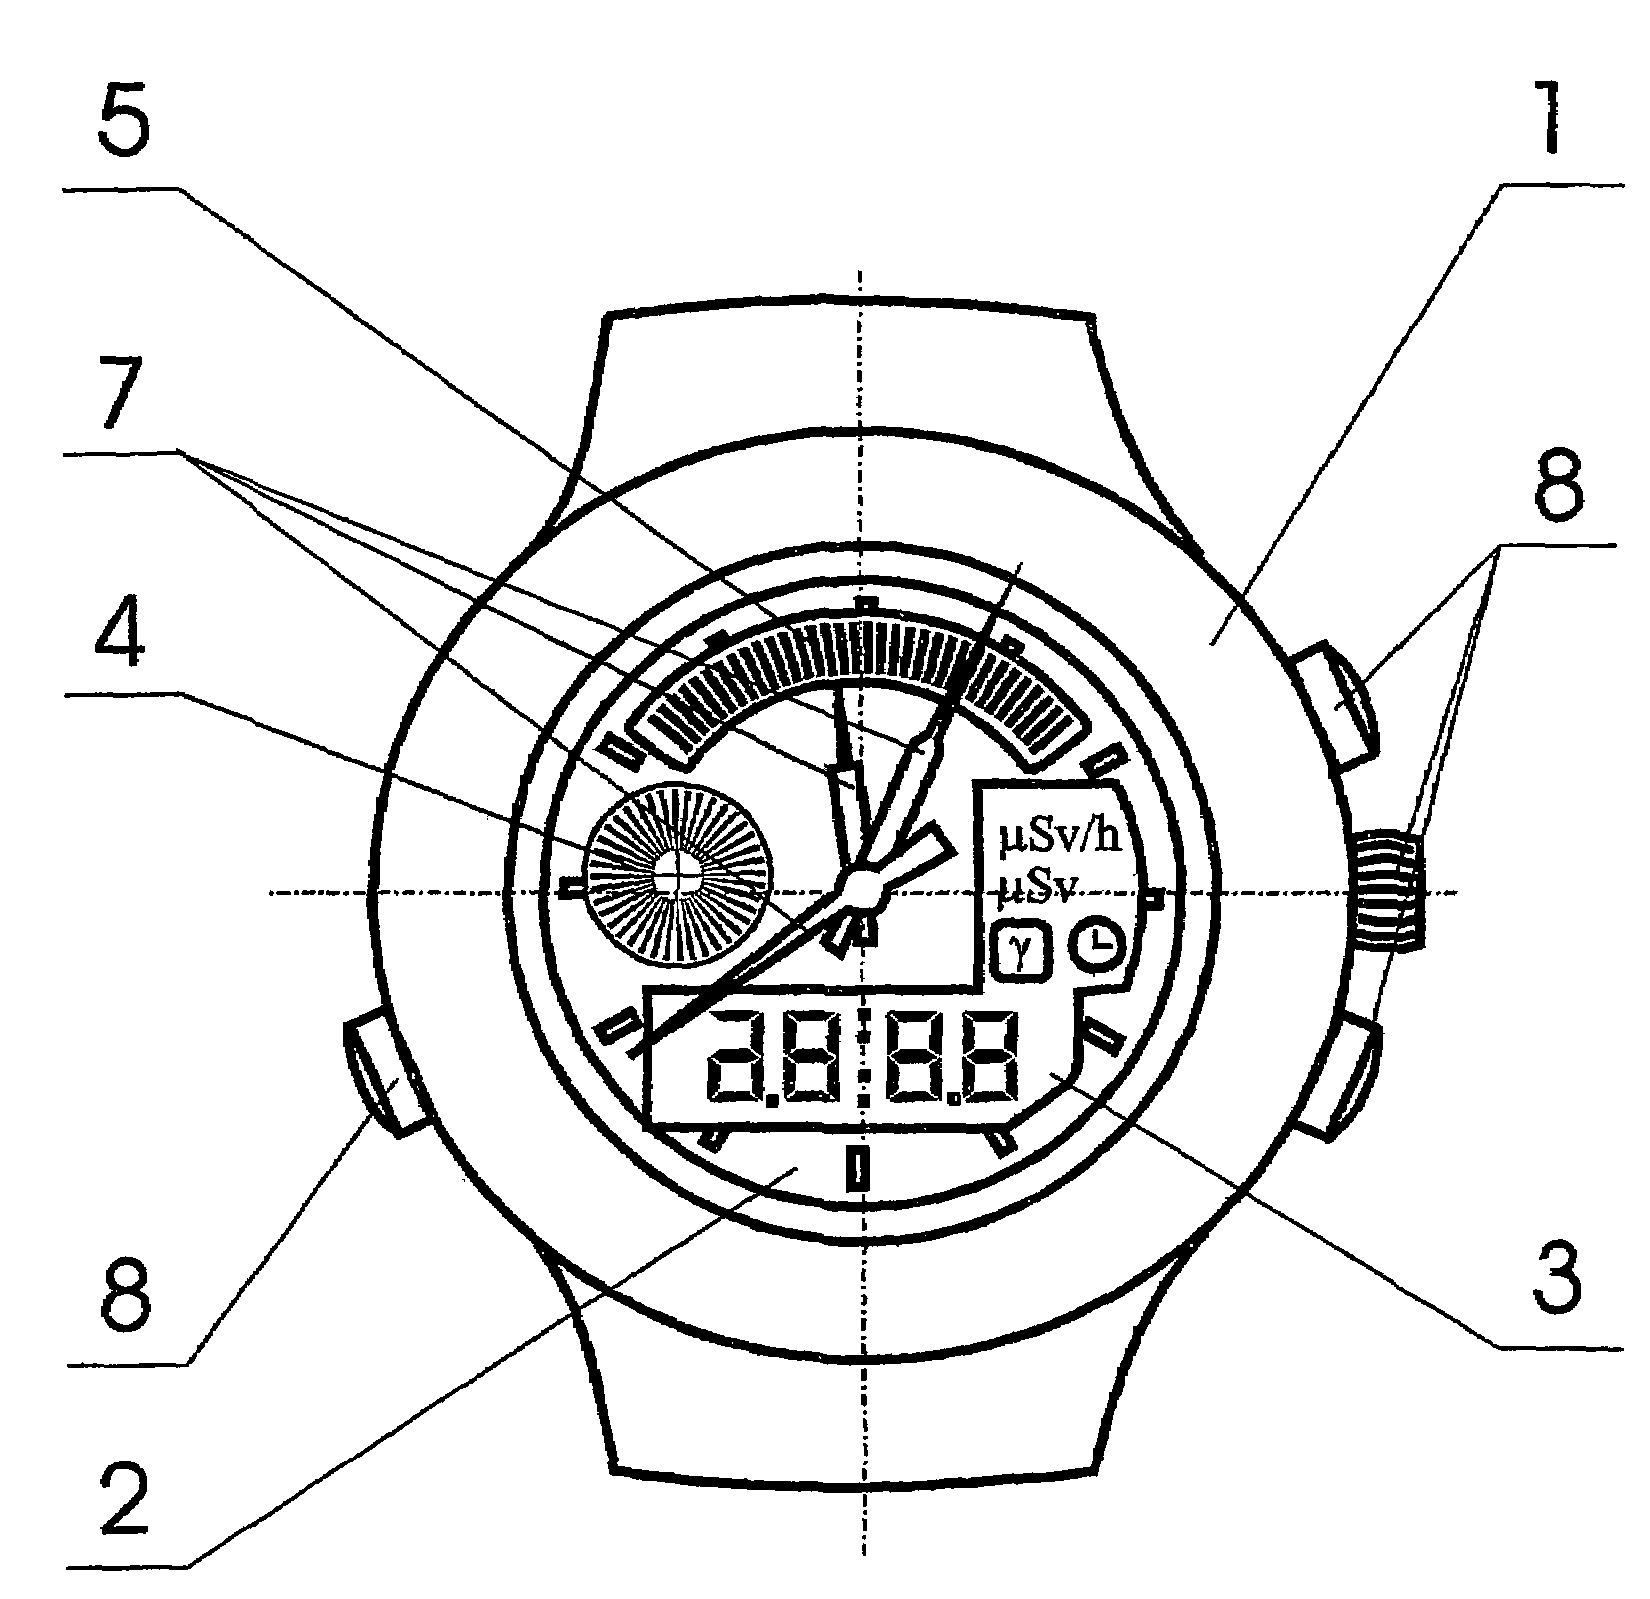 Portable watch with radiation monitor